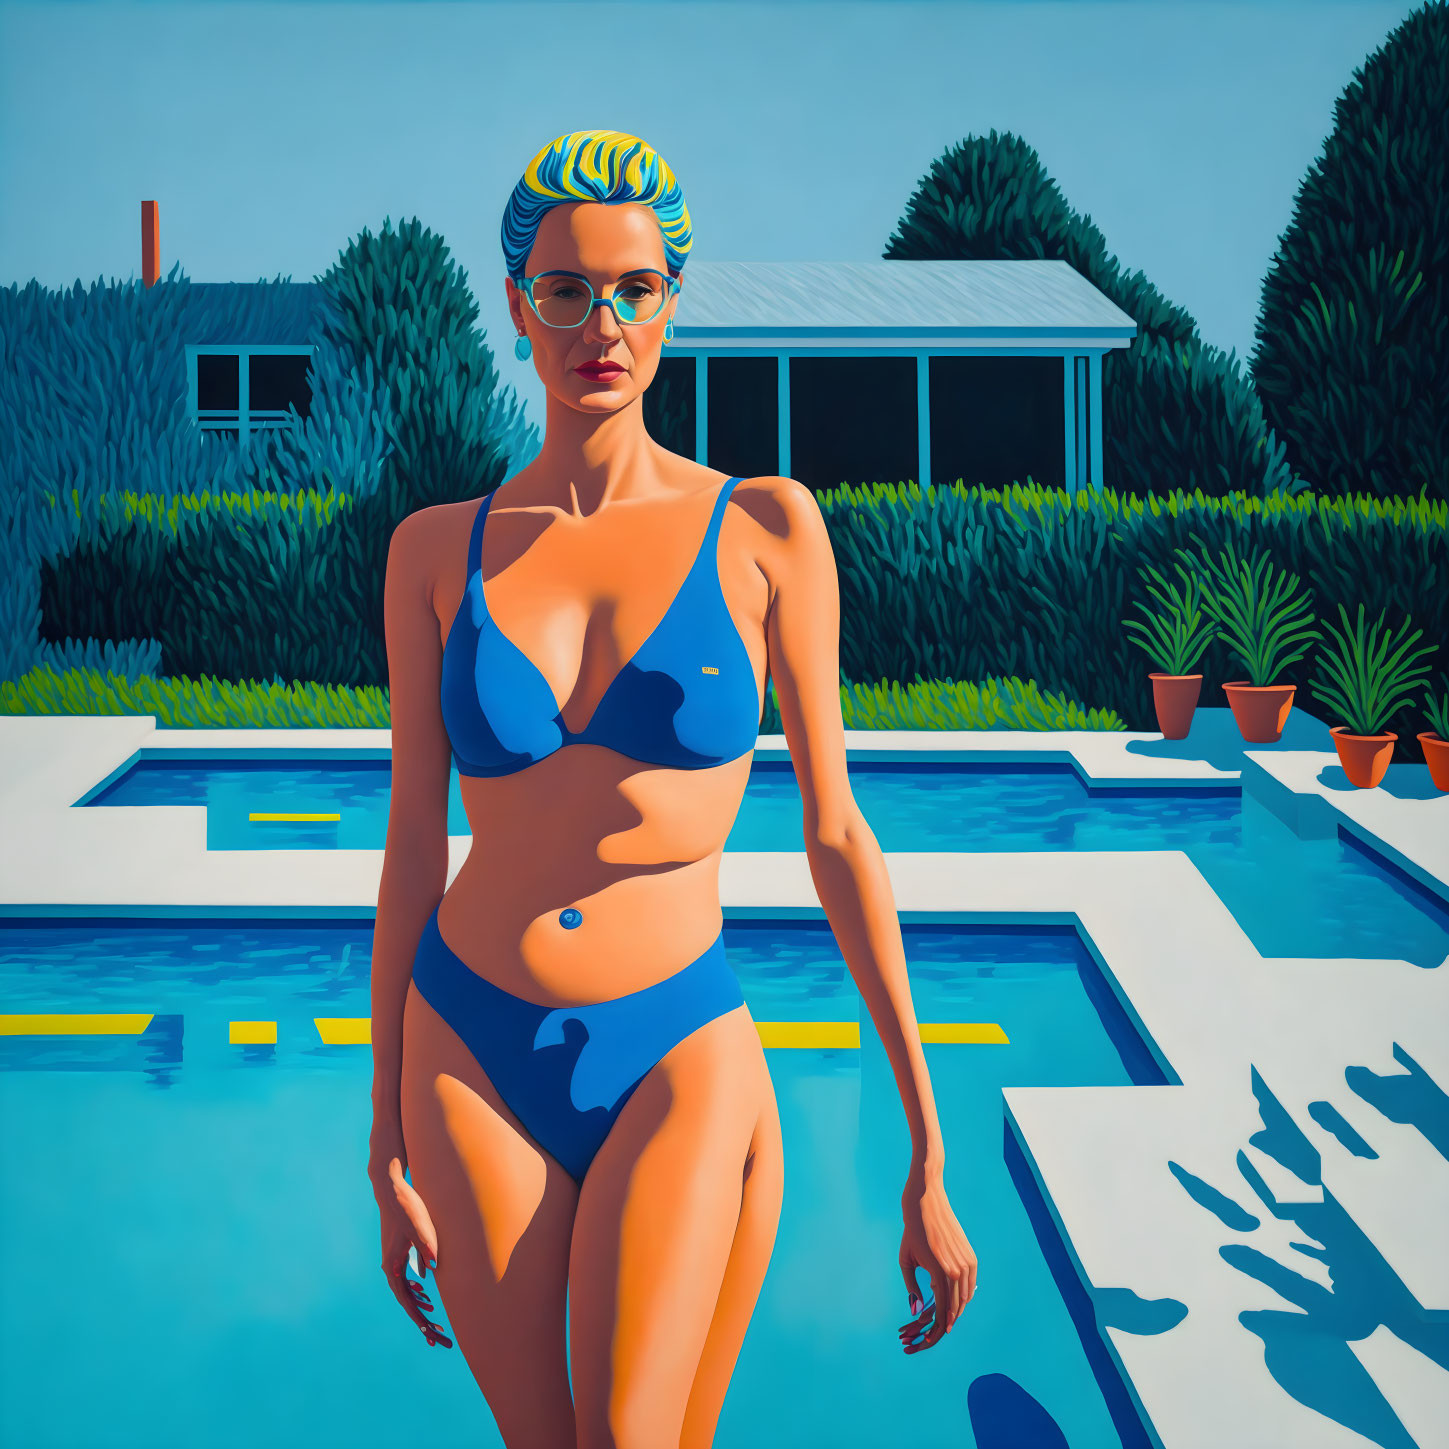 Woman in Blue Swimwear by Poolside with Vibrant Greenery and House Background